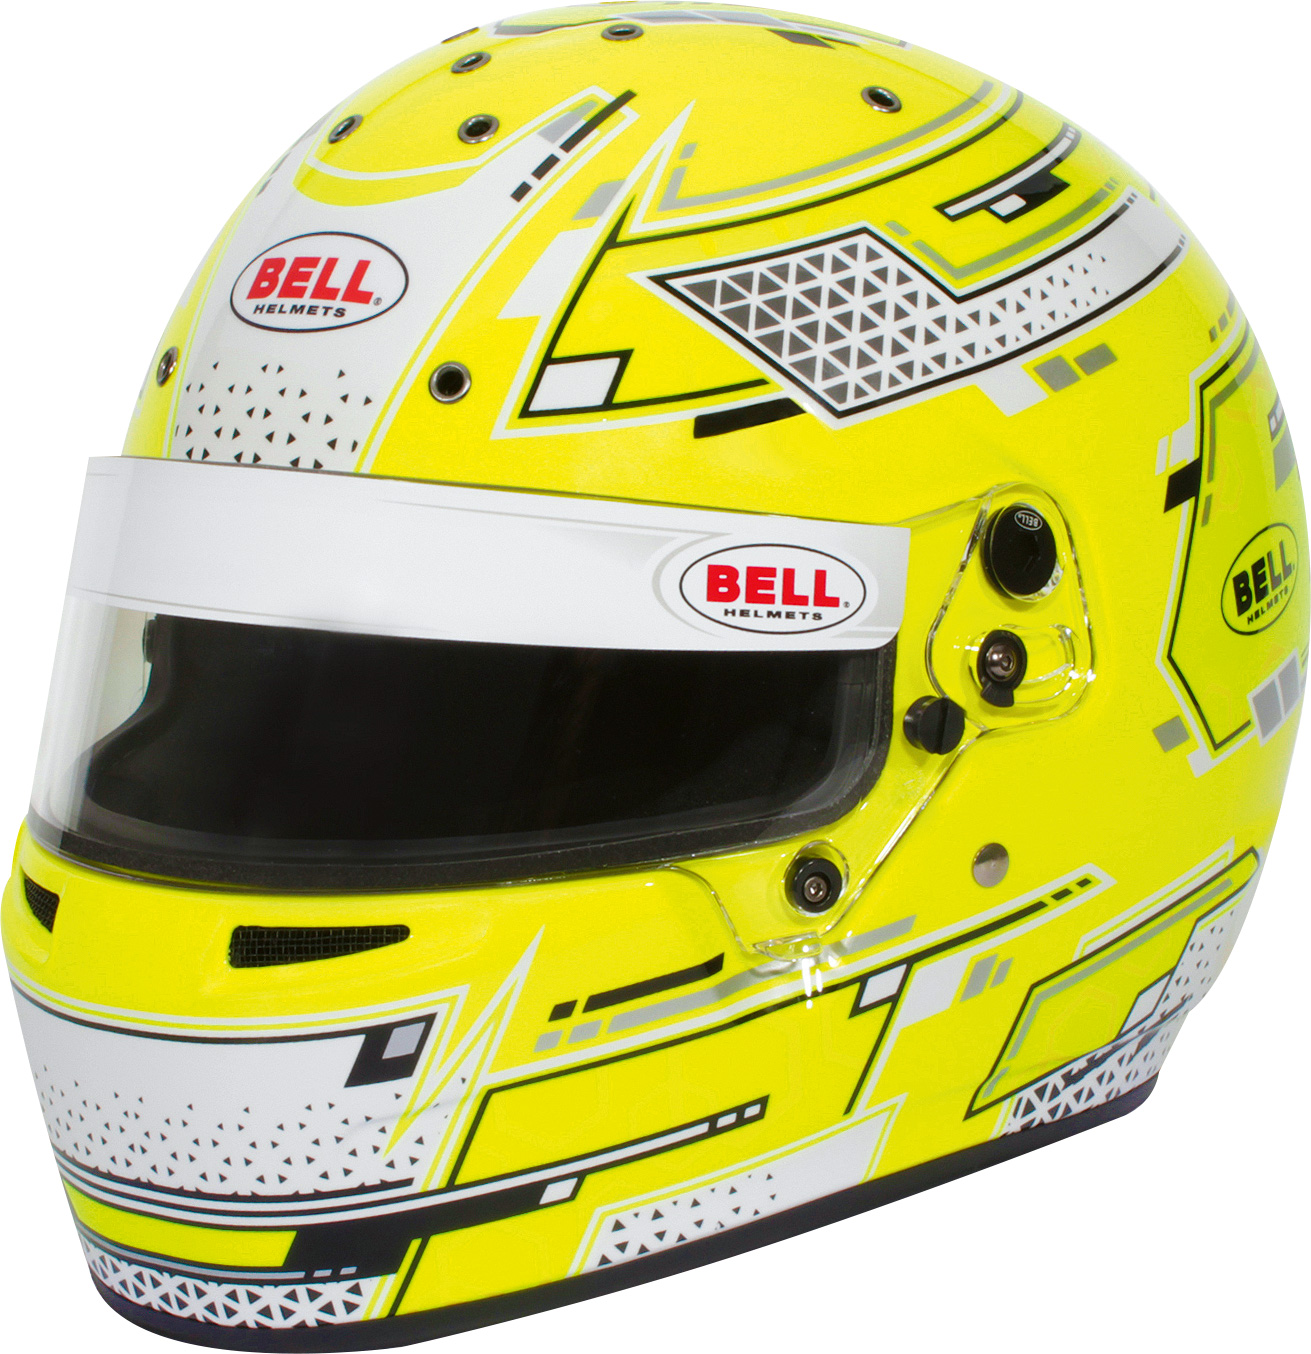 Bell Helm RS7-K